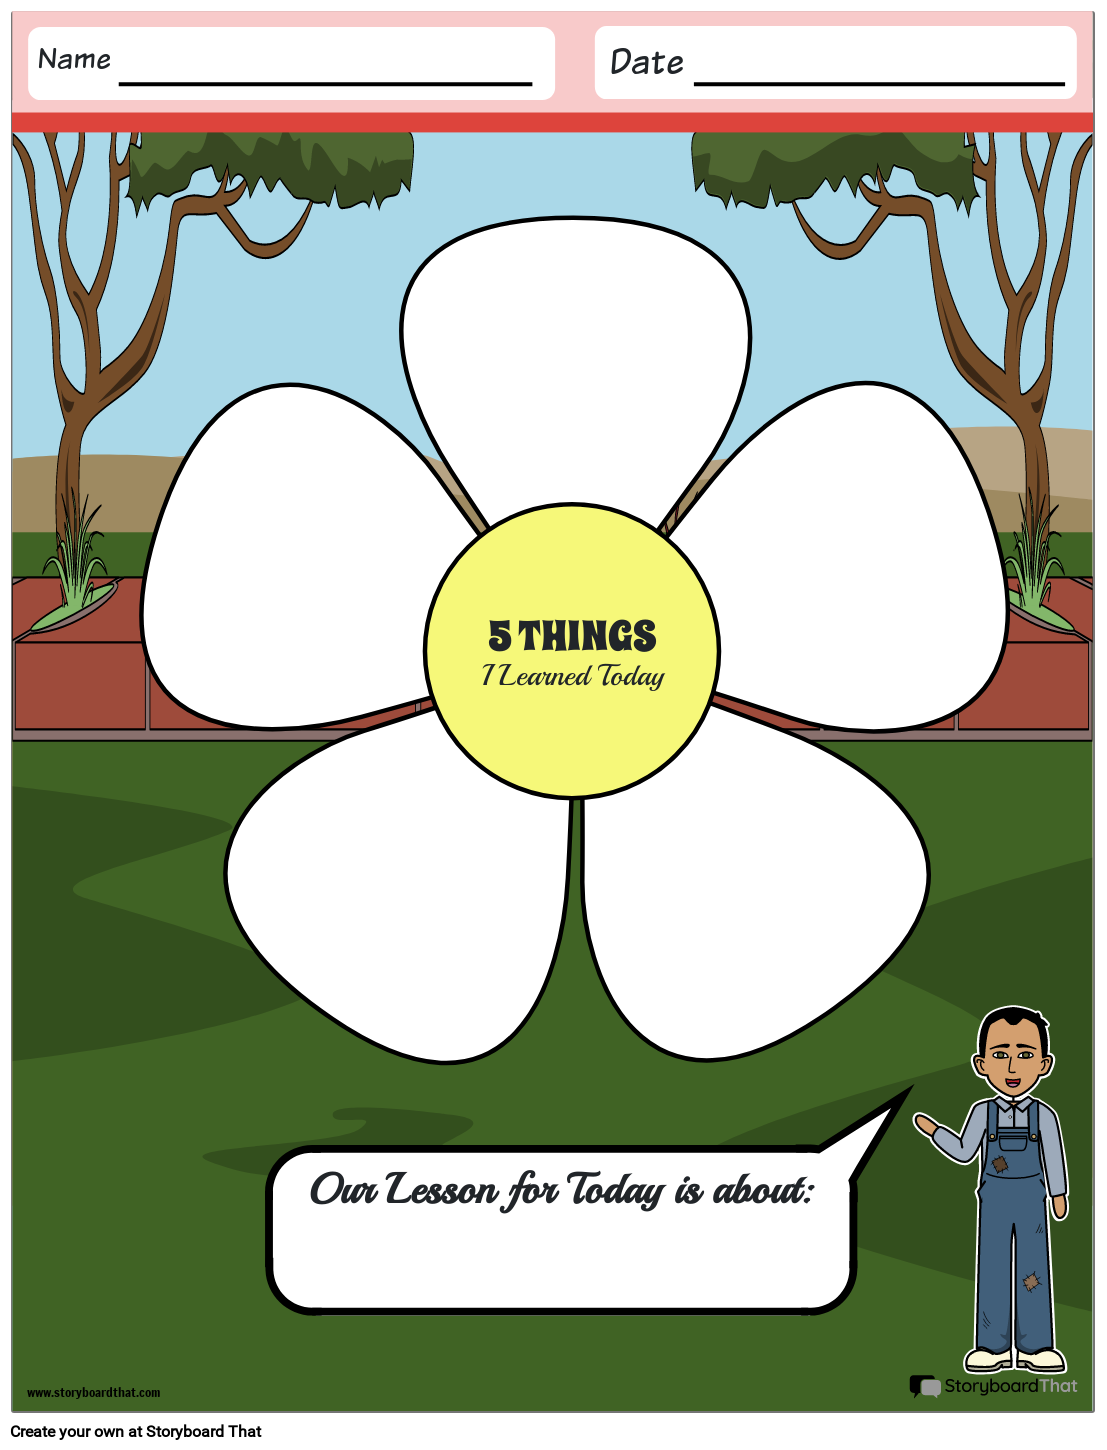 Bloom of Learning Template